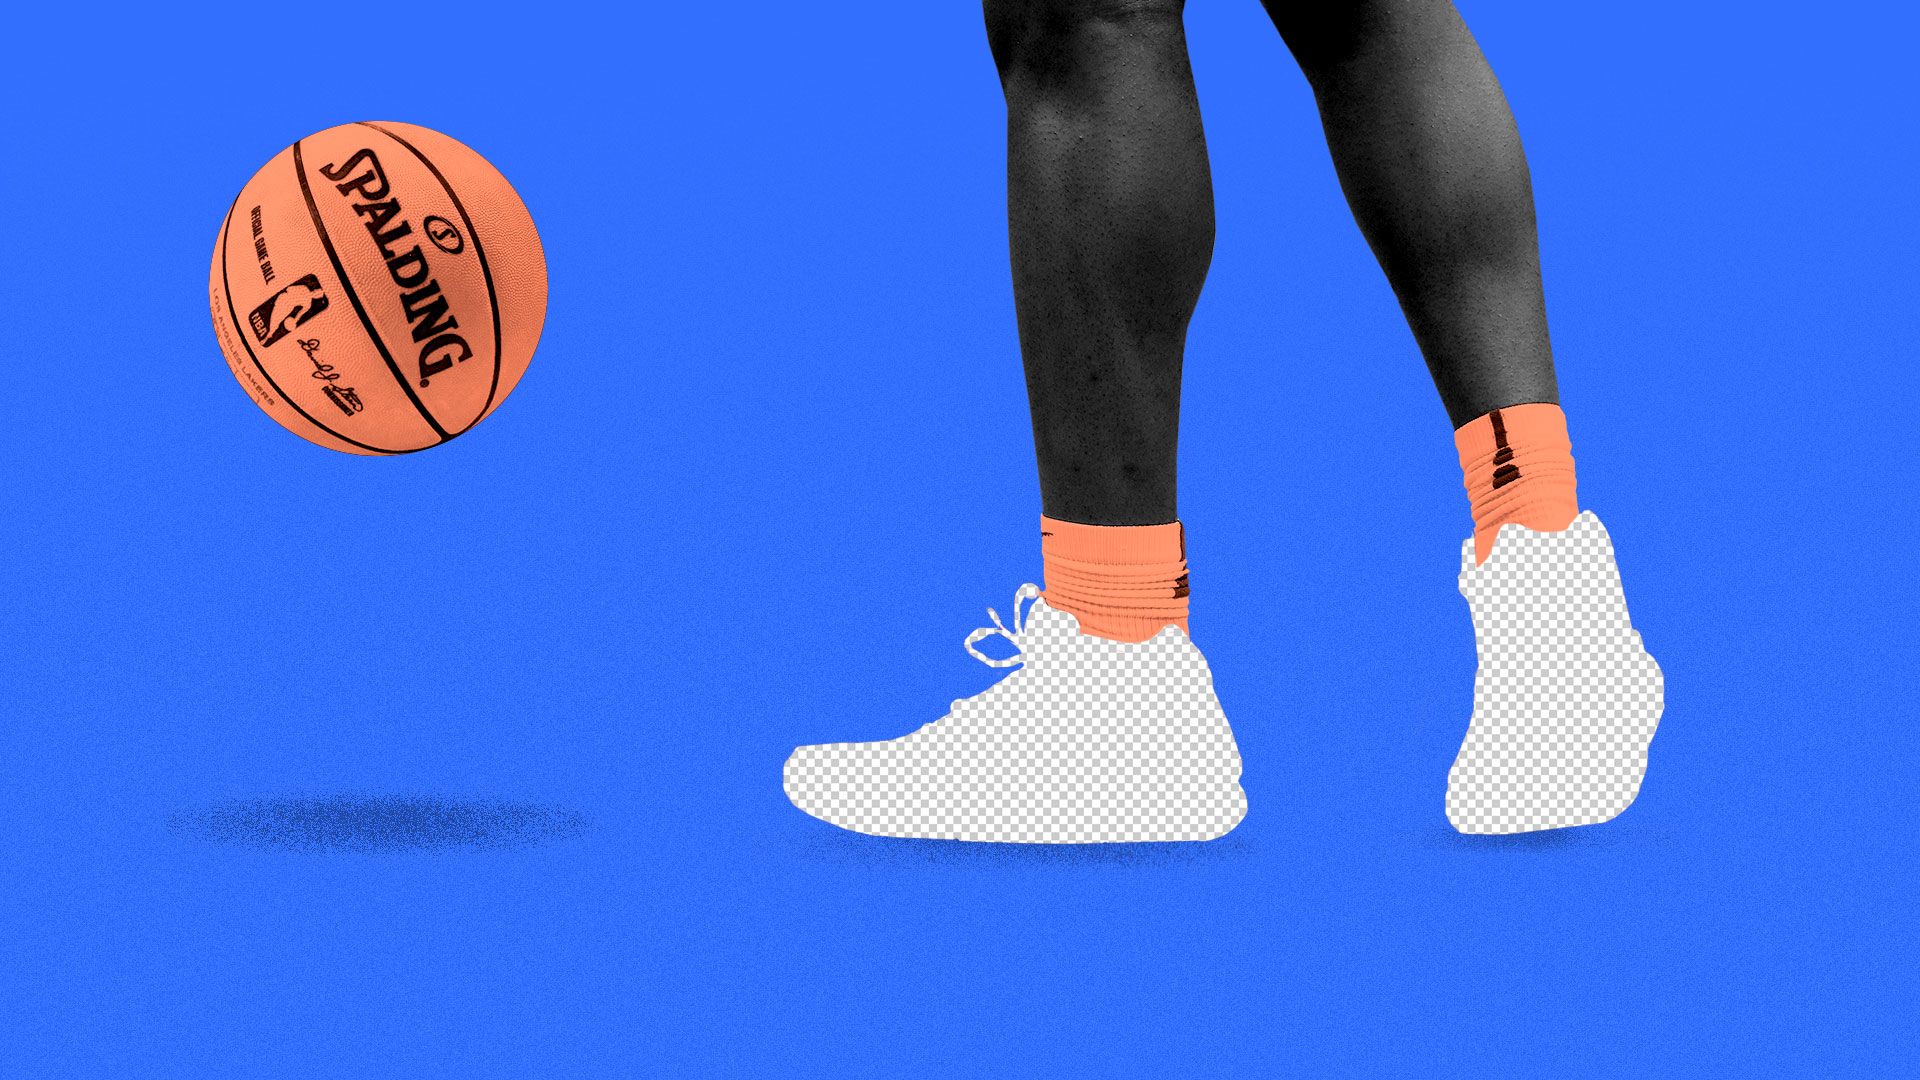 Illustration of Zion Williamson's shoes as empty backgrounds